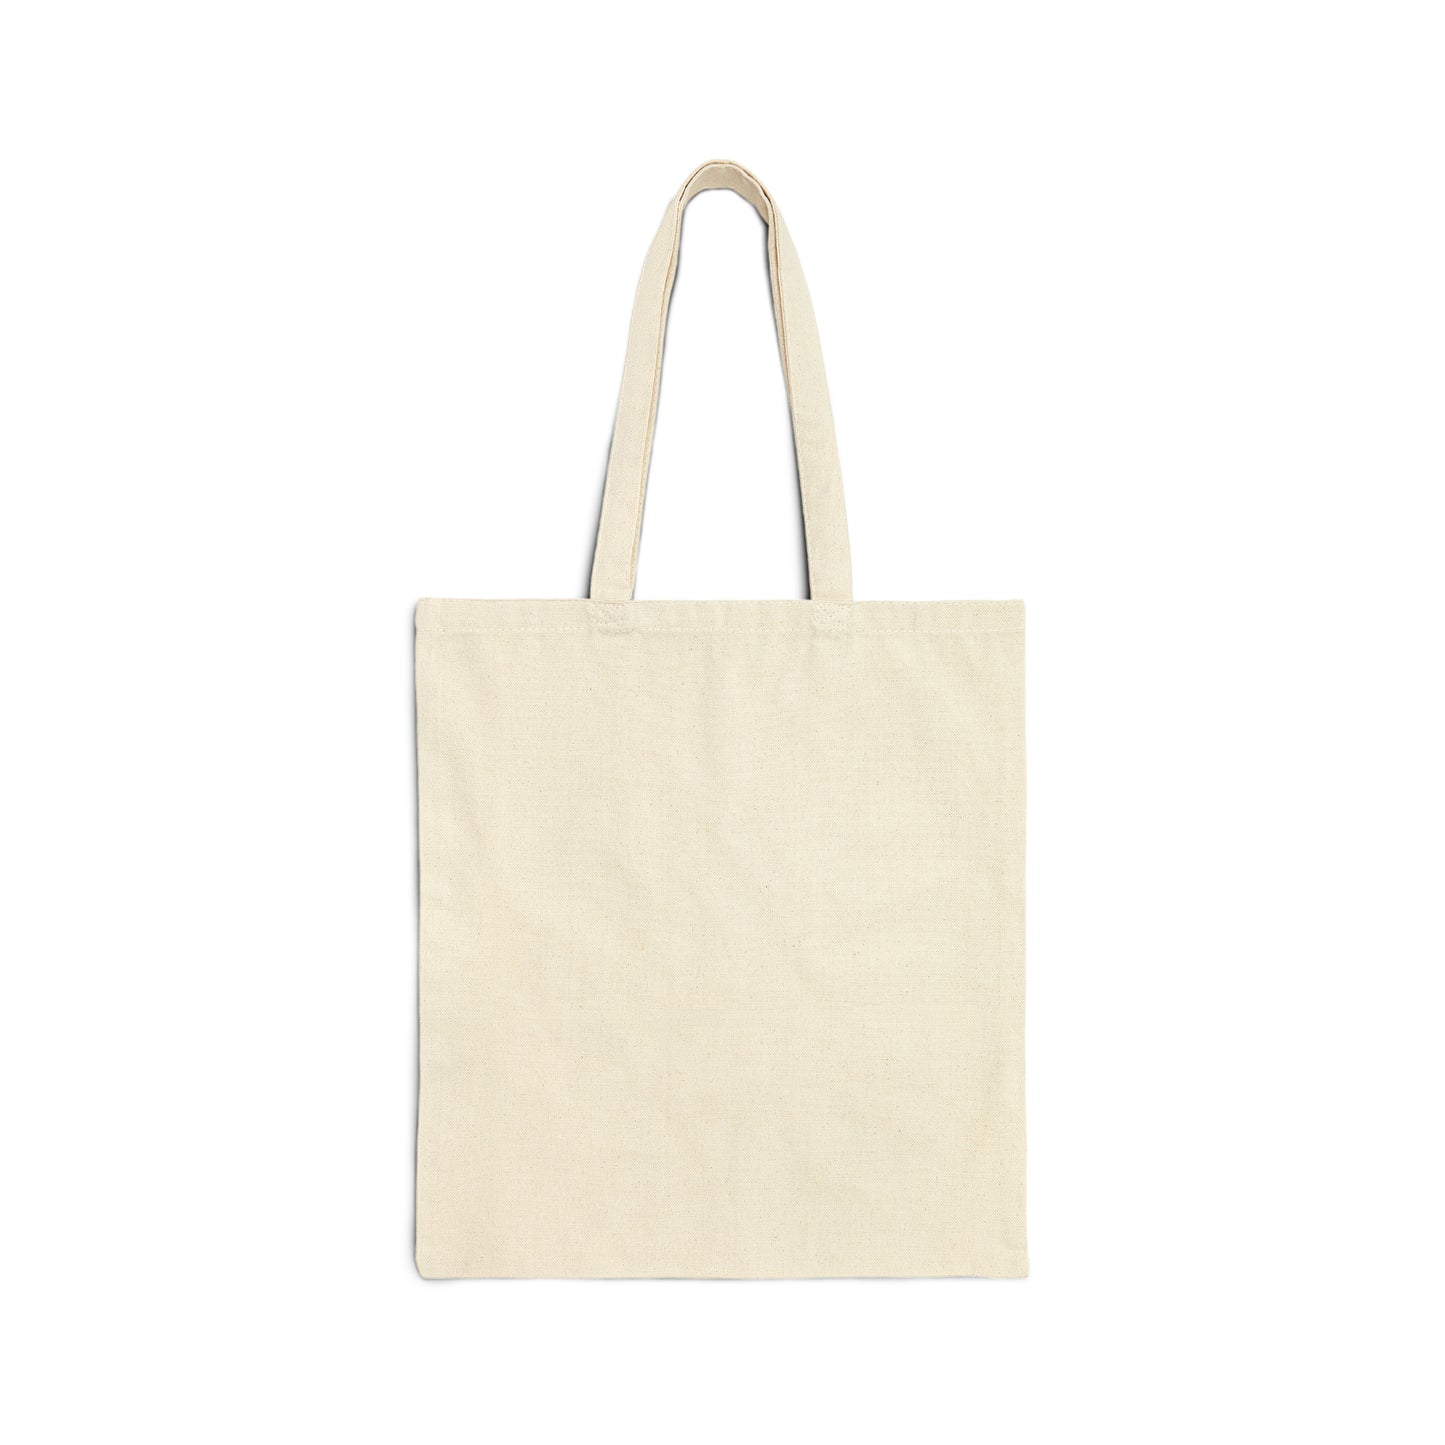 Gentle Strength (XIII) Cotton Canvas Tote Bag